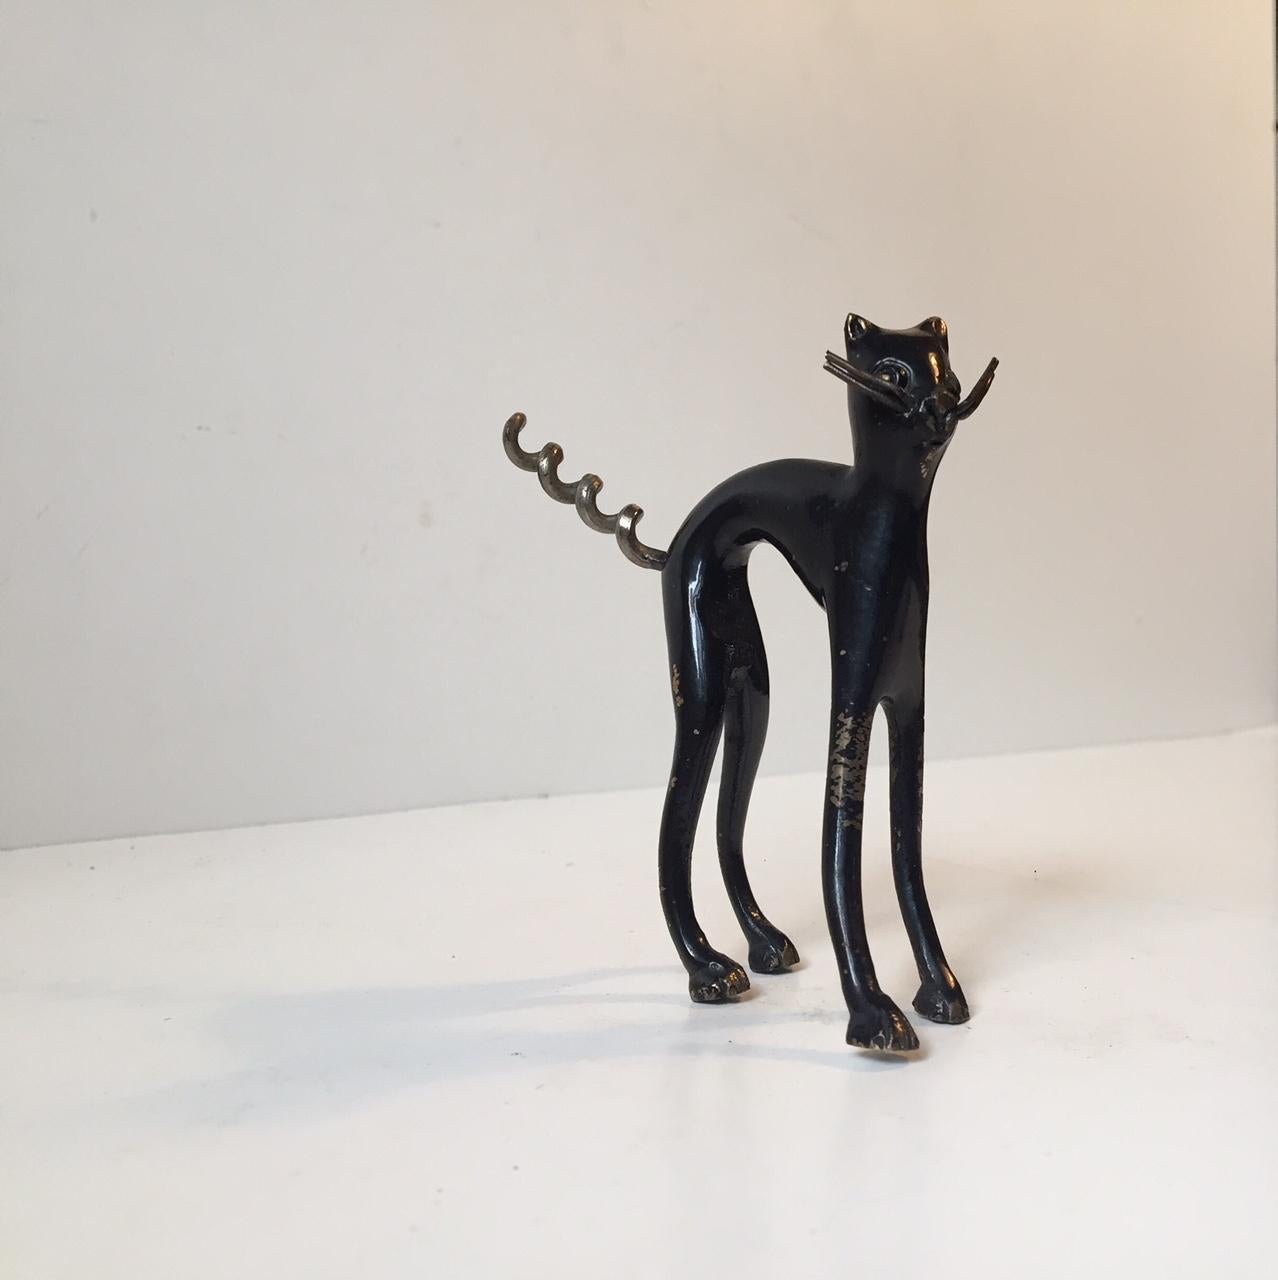 A Victorian Novelty item. A corkscrew in shape of a black cat. The cat is composed of black painted bronze and the 'screw' itself of steel. Perhaps Hertha Baller, Hagenauer and Walter Bosse was inspired by these old Victorian novelty item in their